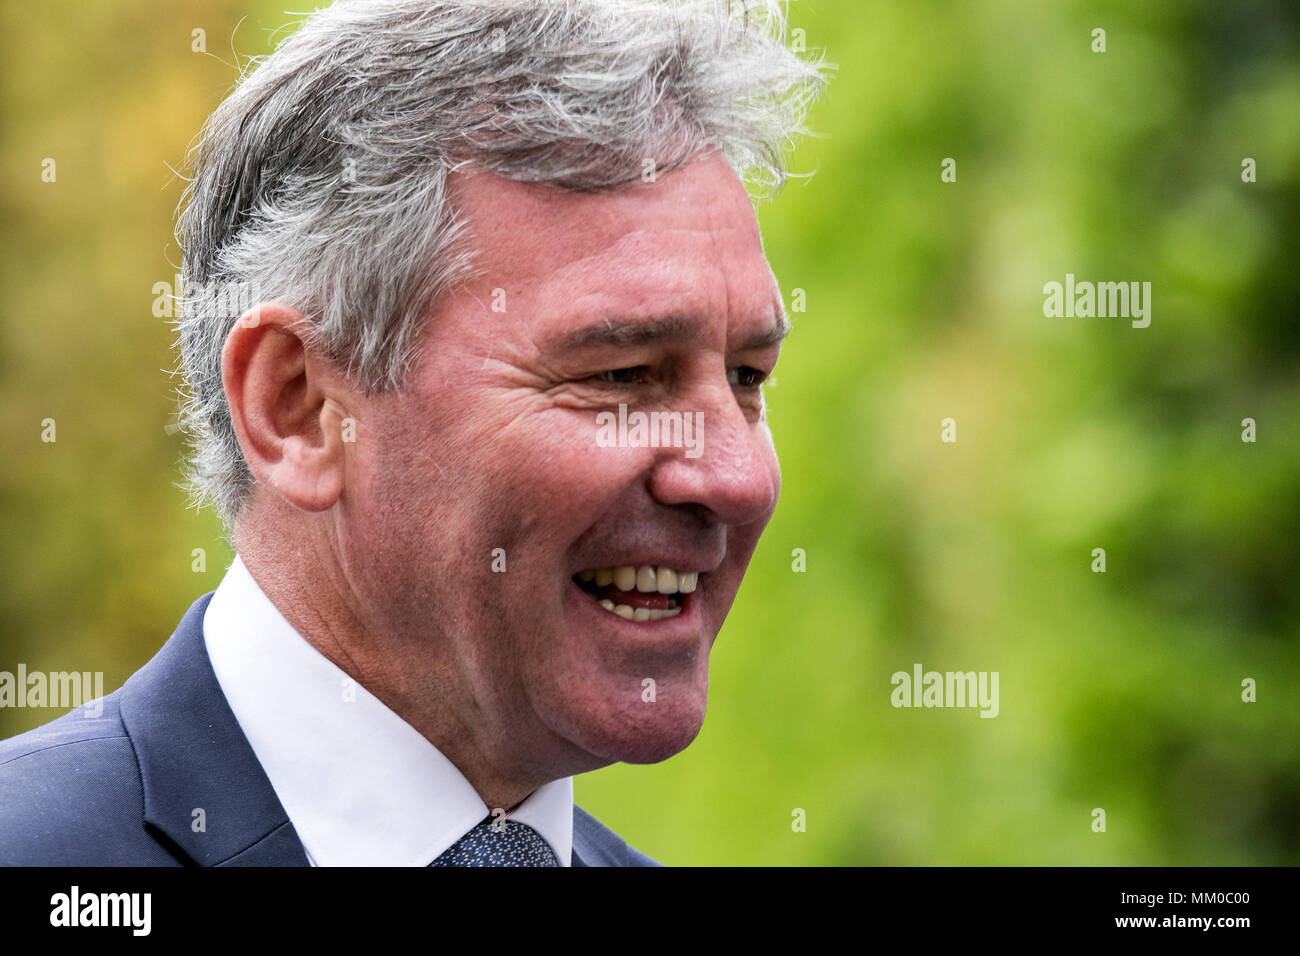 Footballing hero Bryan Robson attends the opening day of the Boodles May Festival at the Chester racecourse_ May 2018.   High spirits and fine fashions were the order of the day as people flocked in to this fabulous event on the horse racing calendar in the beautiful city of Chester. Stock Photo